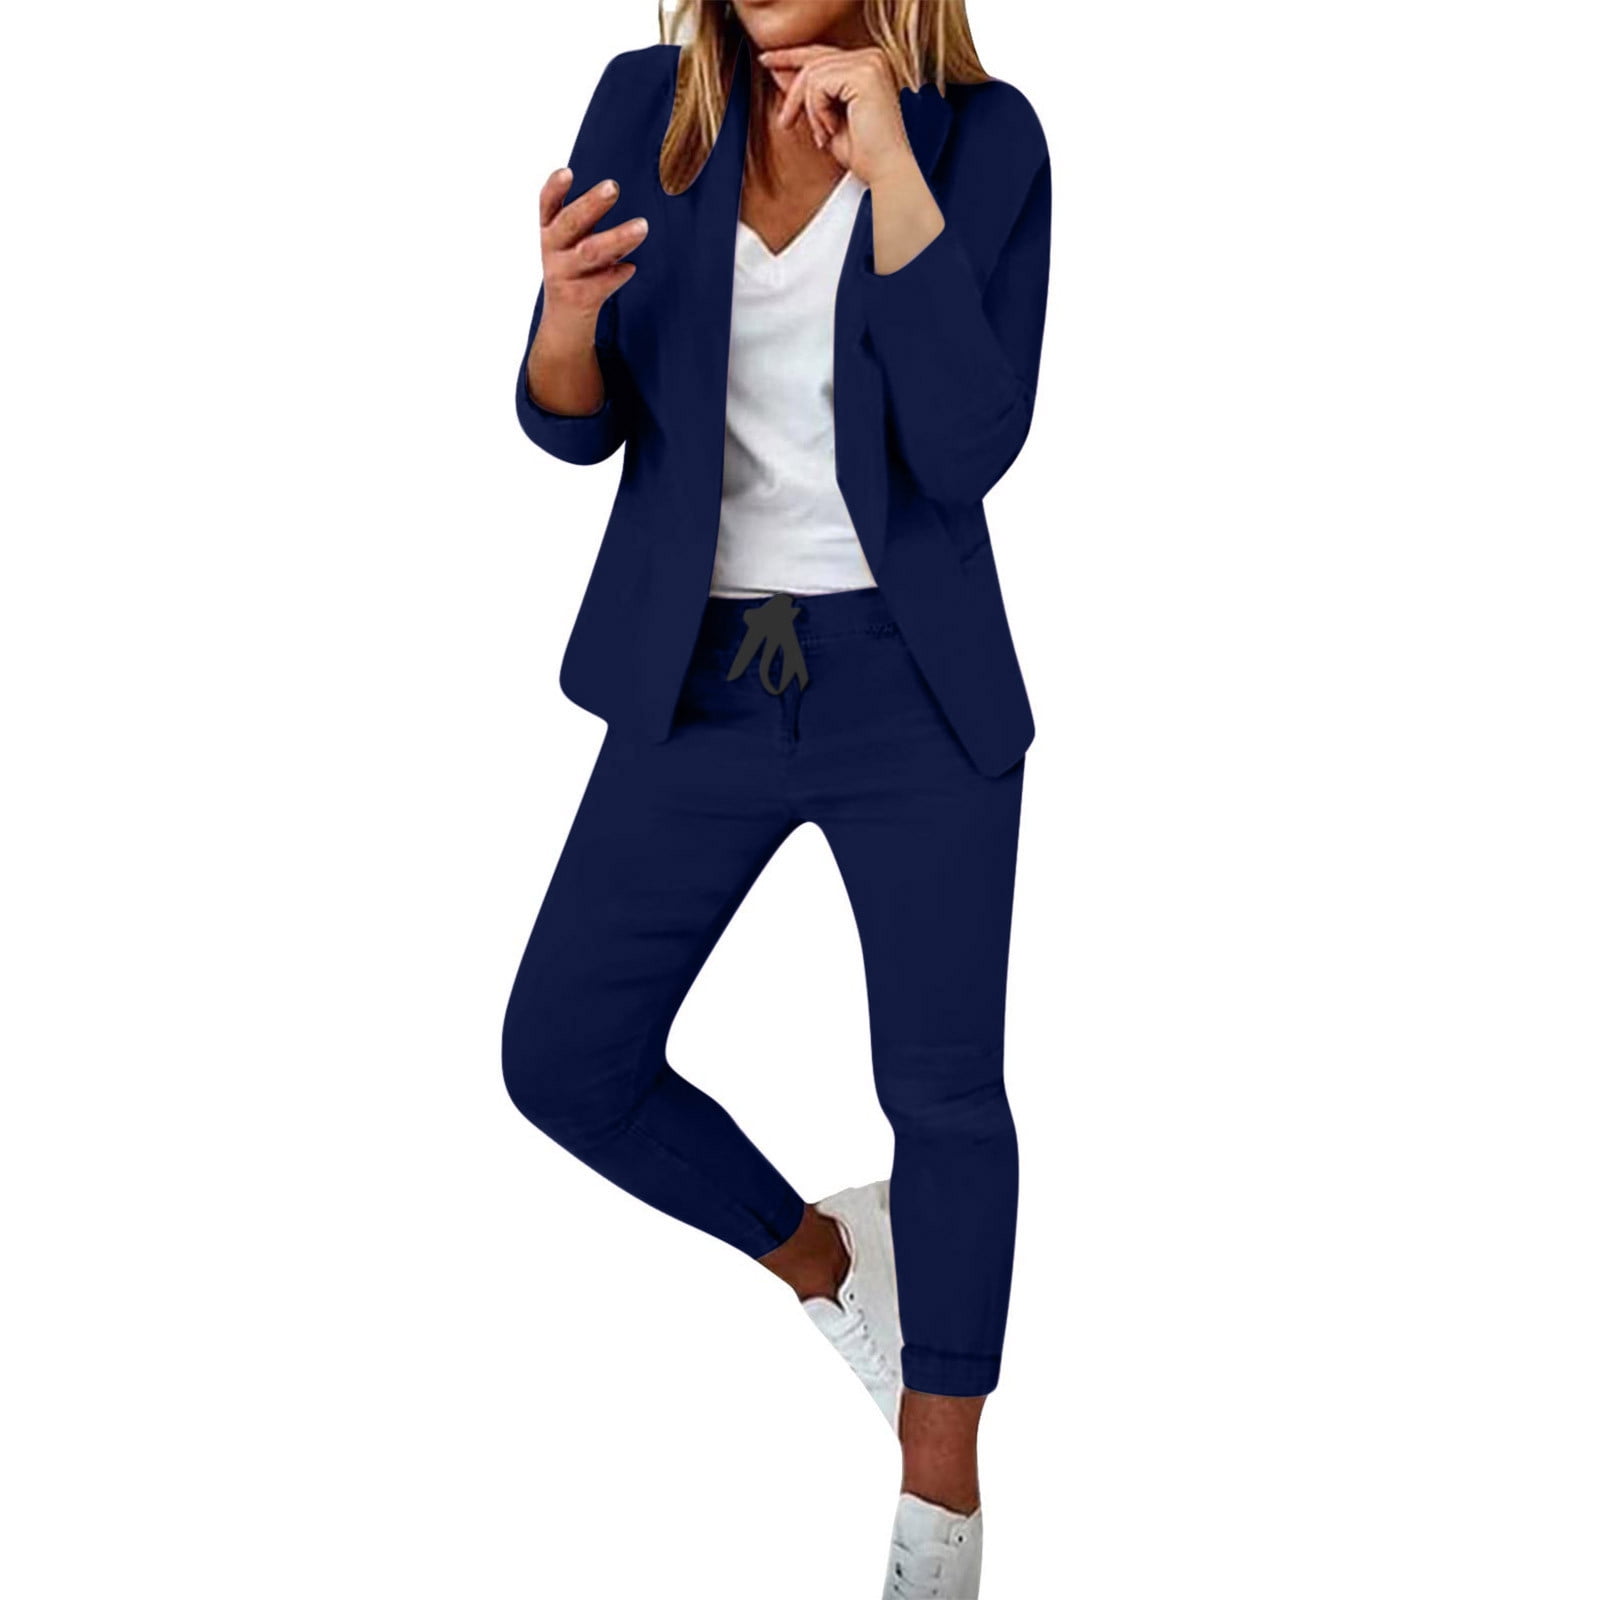 REORIAFEE Going out Sets for Women Cute Summer Outfits Women's Long Sleeve  Suit Pants Casual Elegant Business Suit Navy XL 